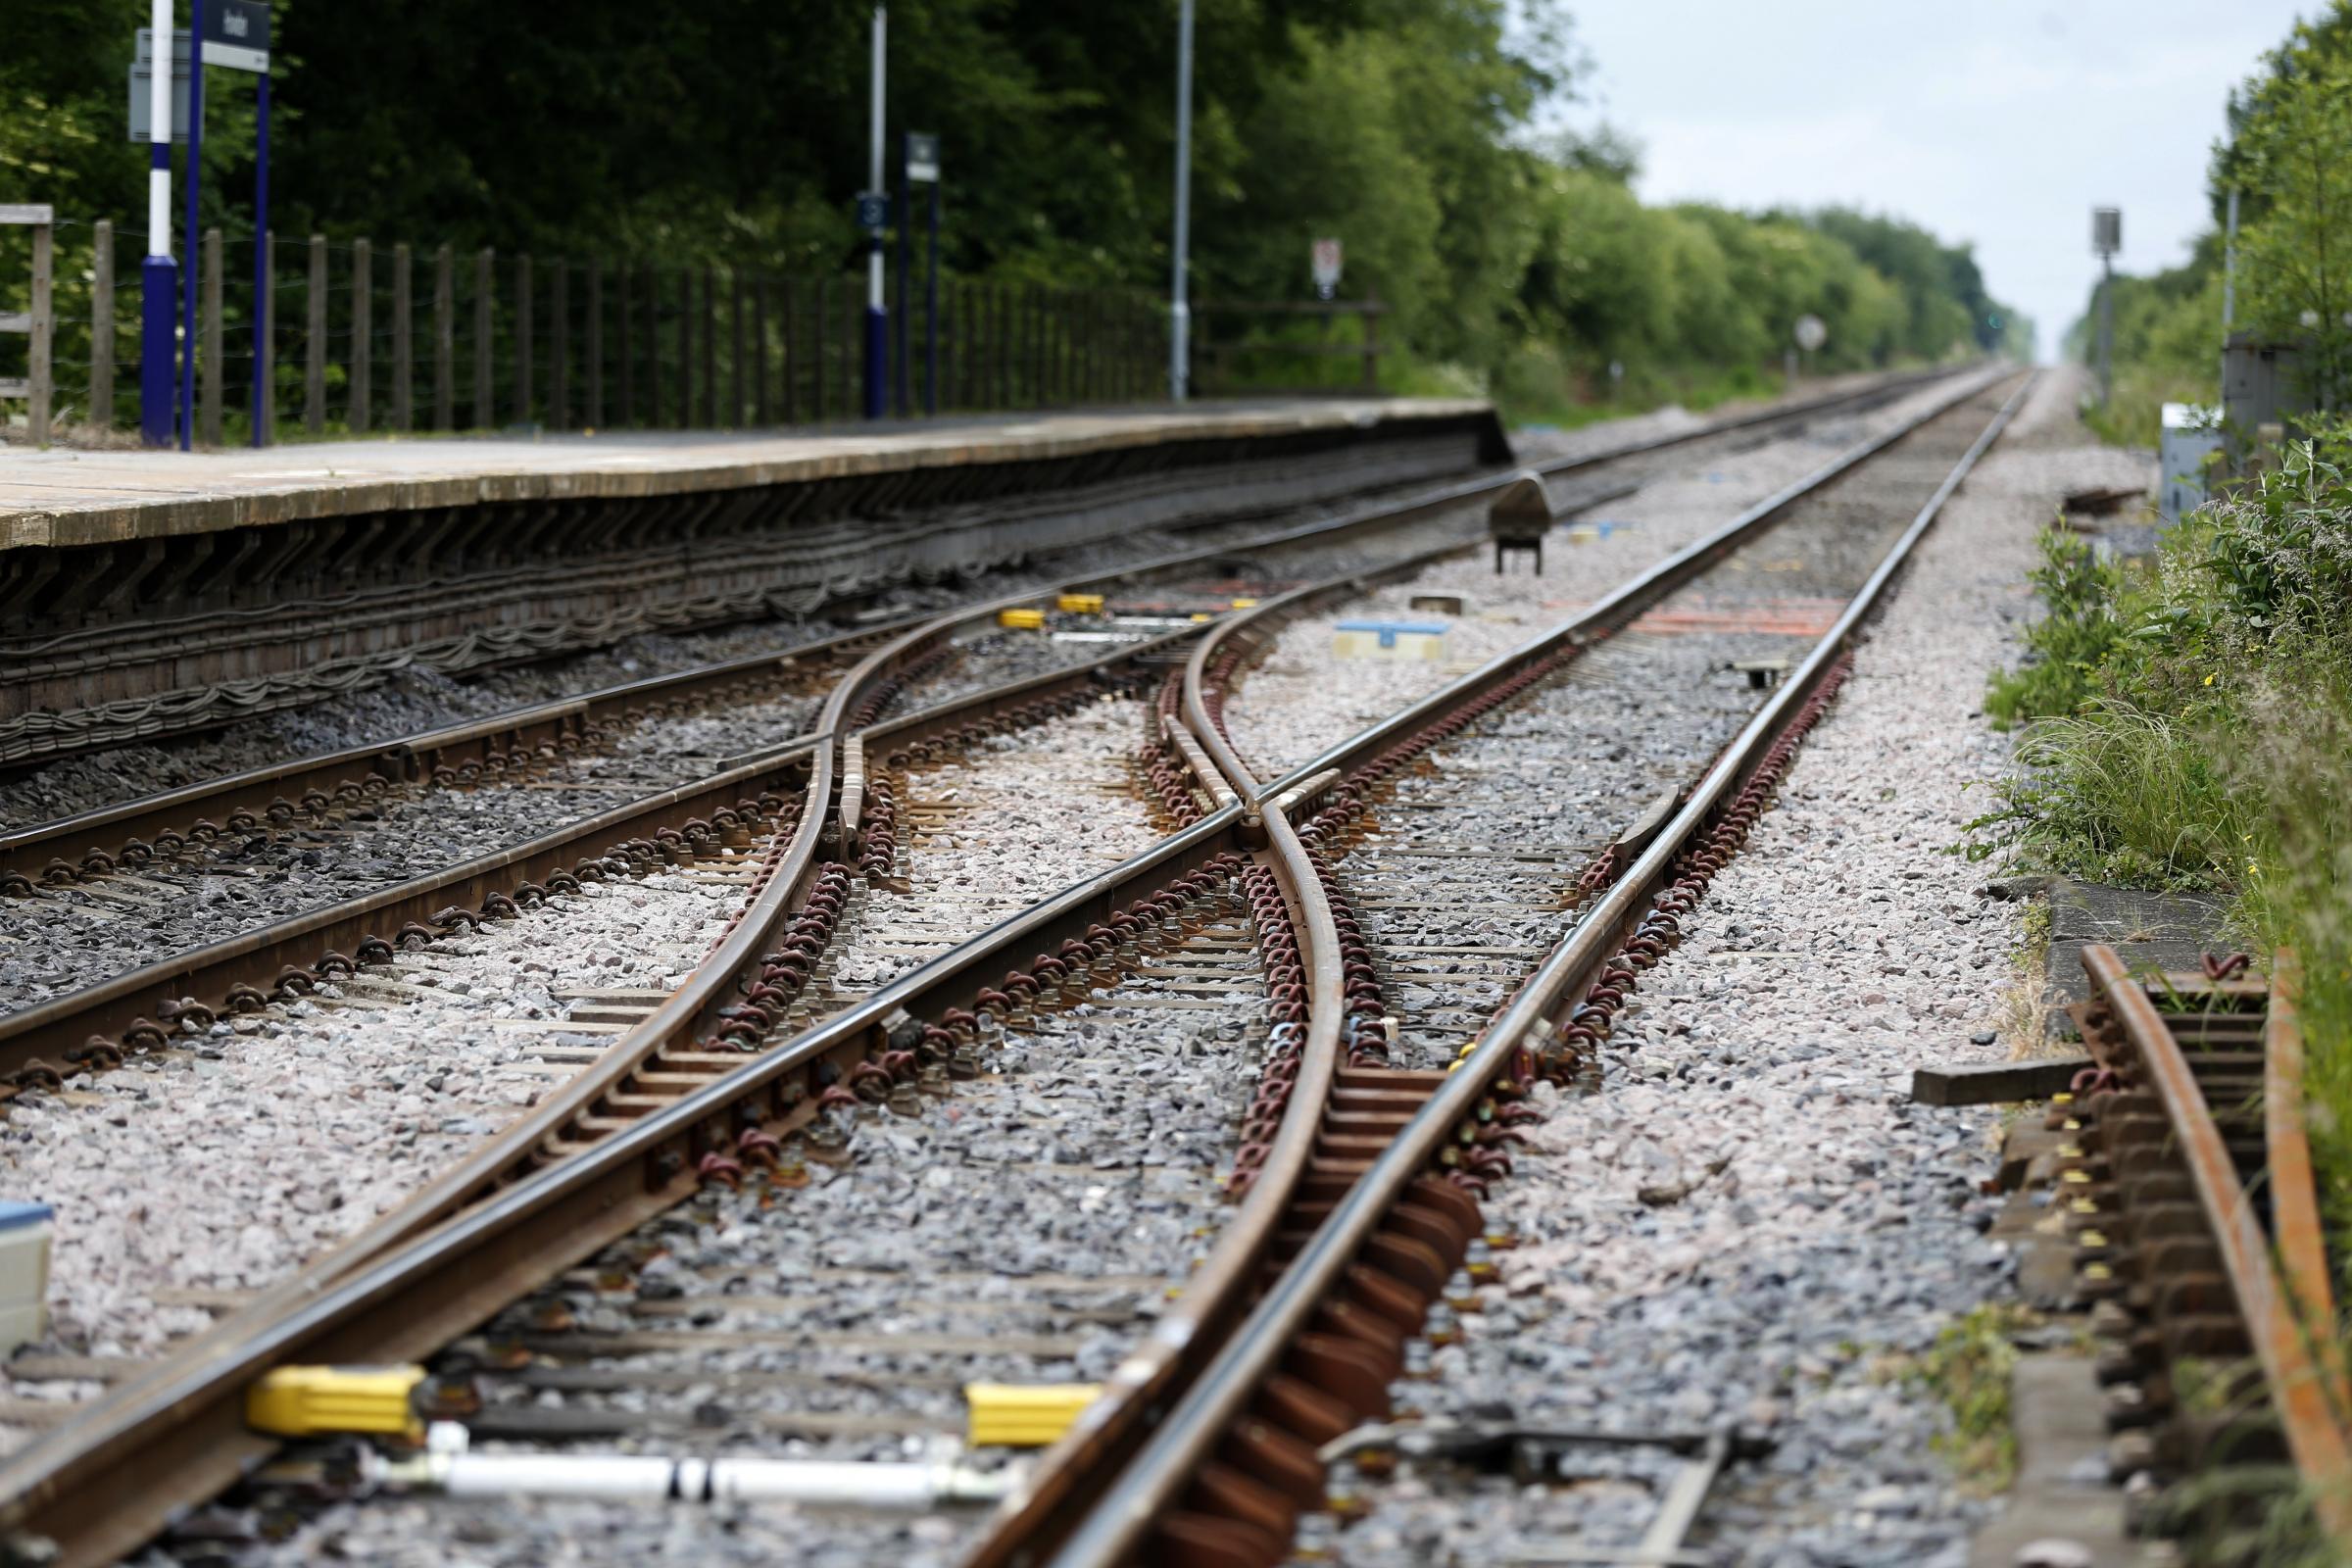 West Midlands Trains services disrupted as rail workers go on strike - Ealing Times